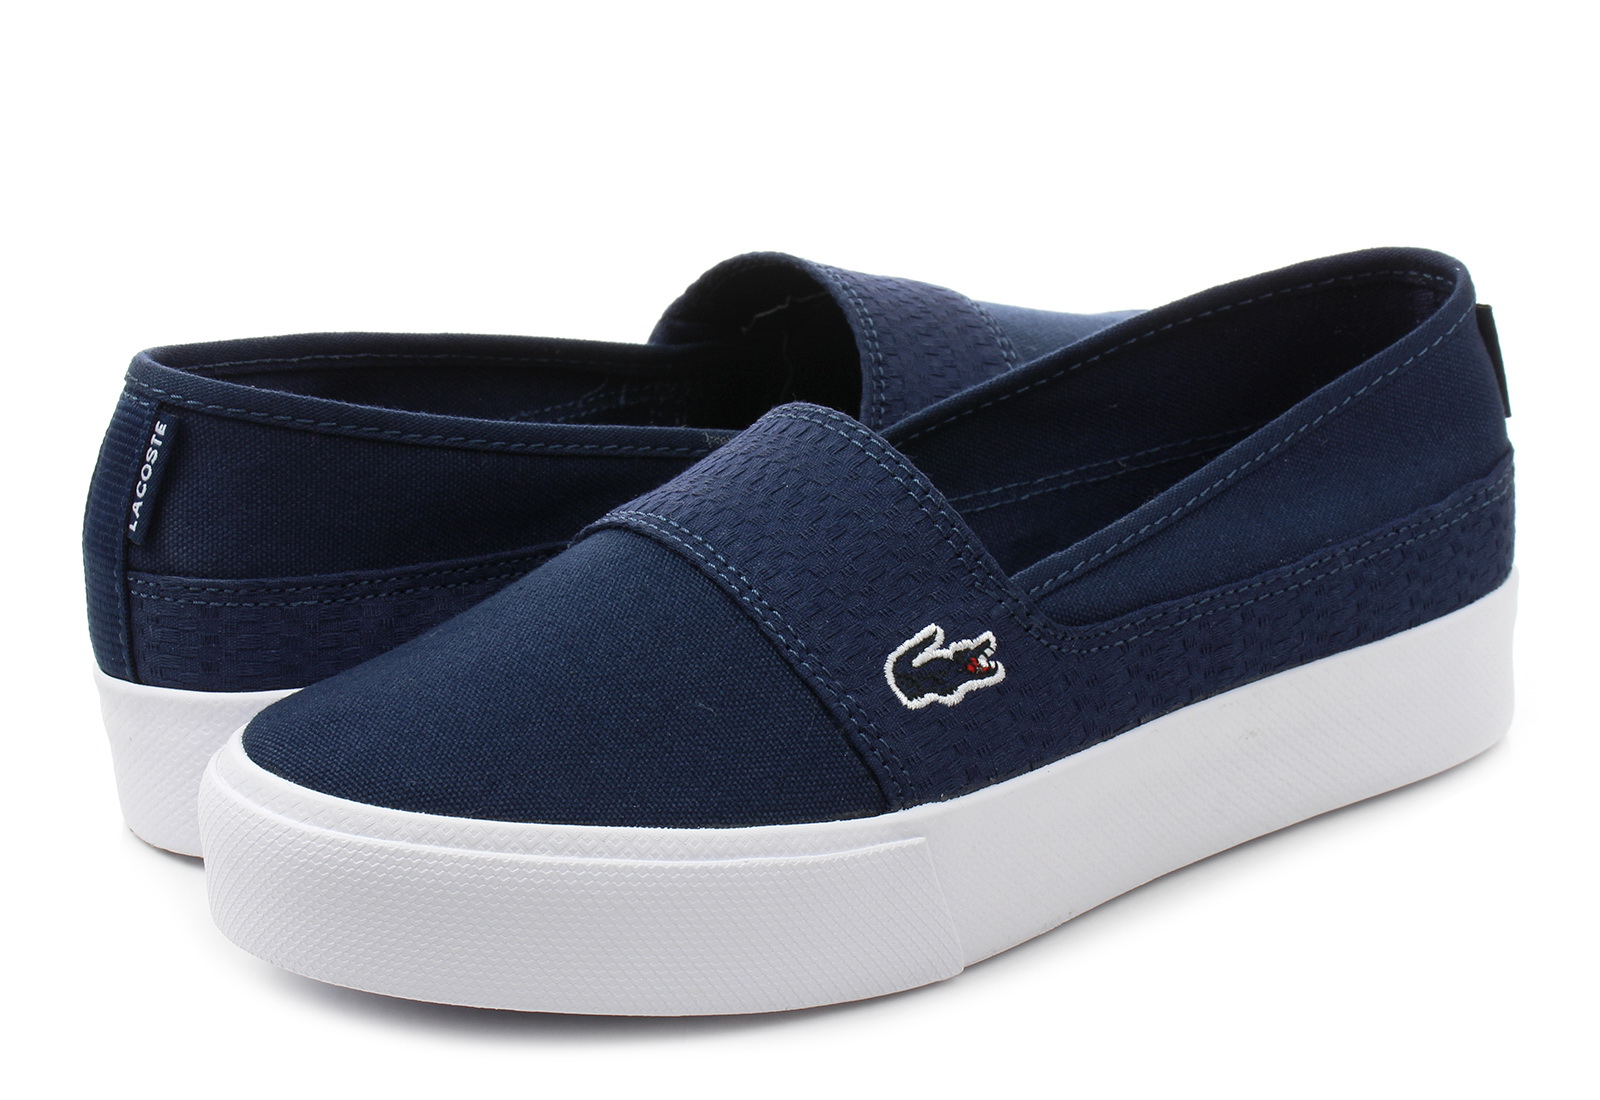 Buy > lacoste shoes nz > in stock